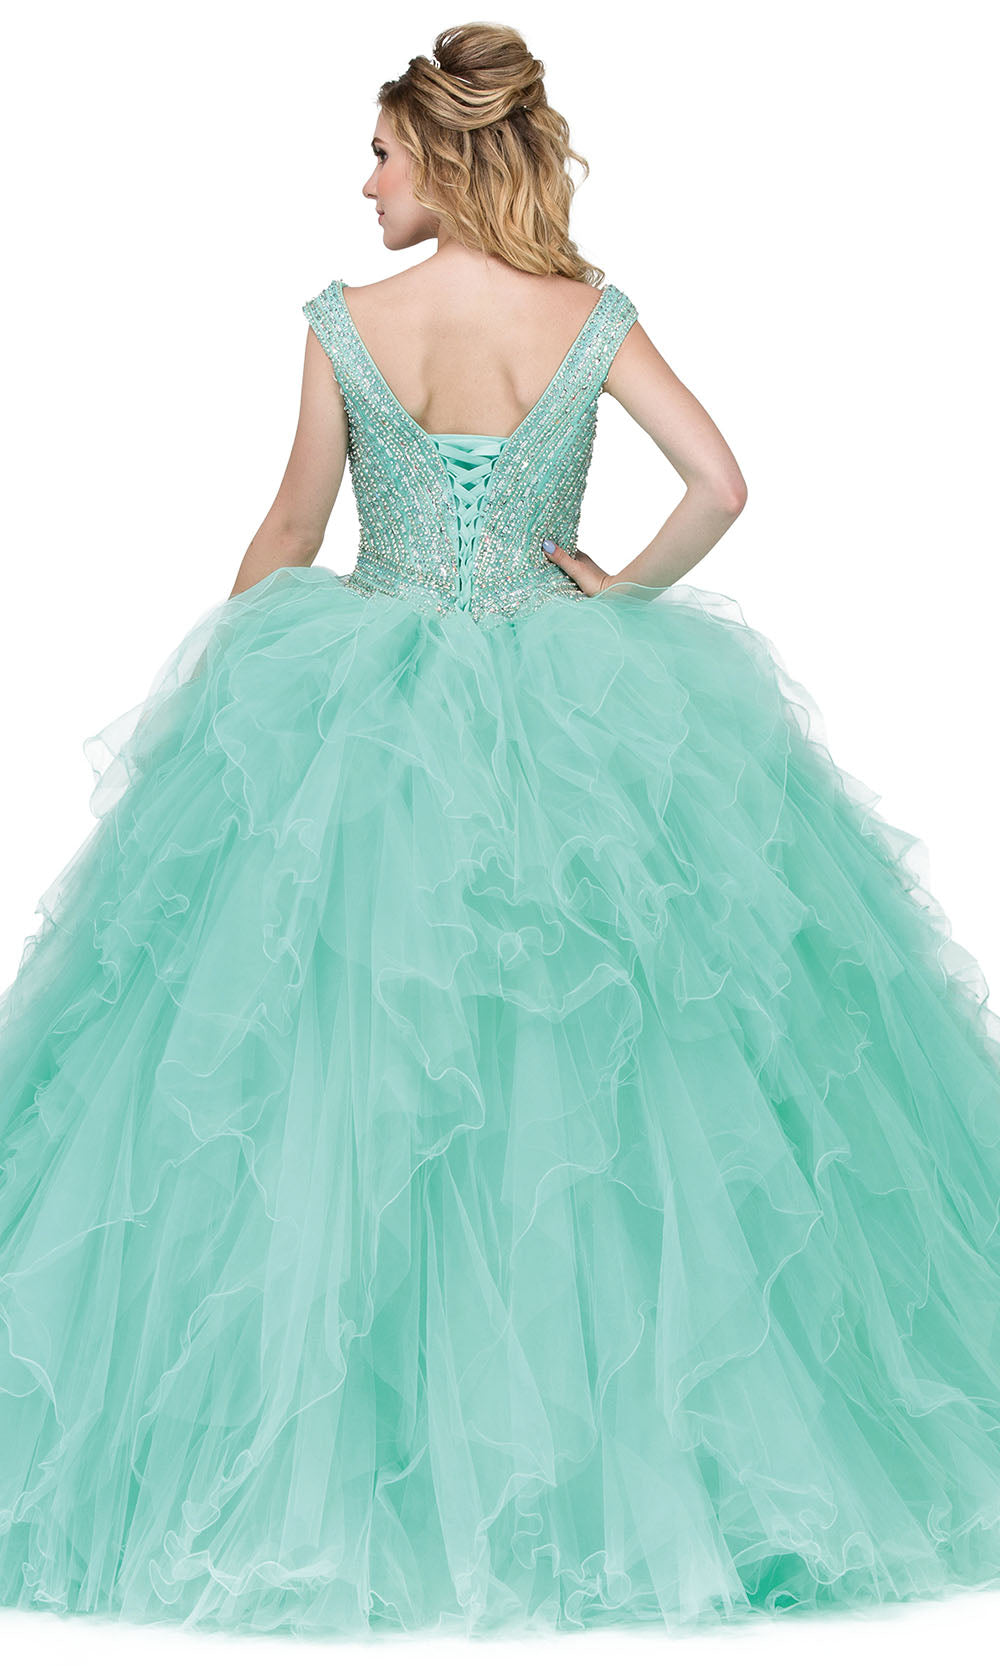 Dancing Queen - 1273 Embellished V Neck Ruffled Ballgown In Green